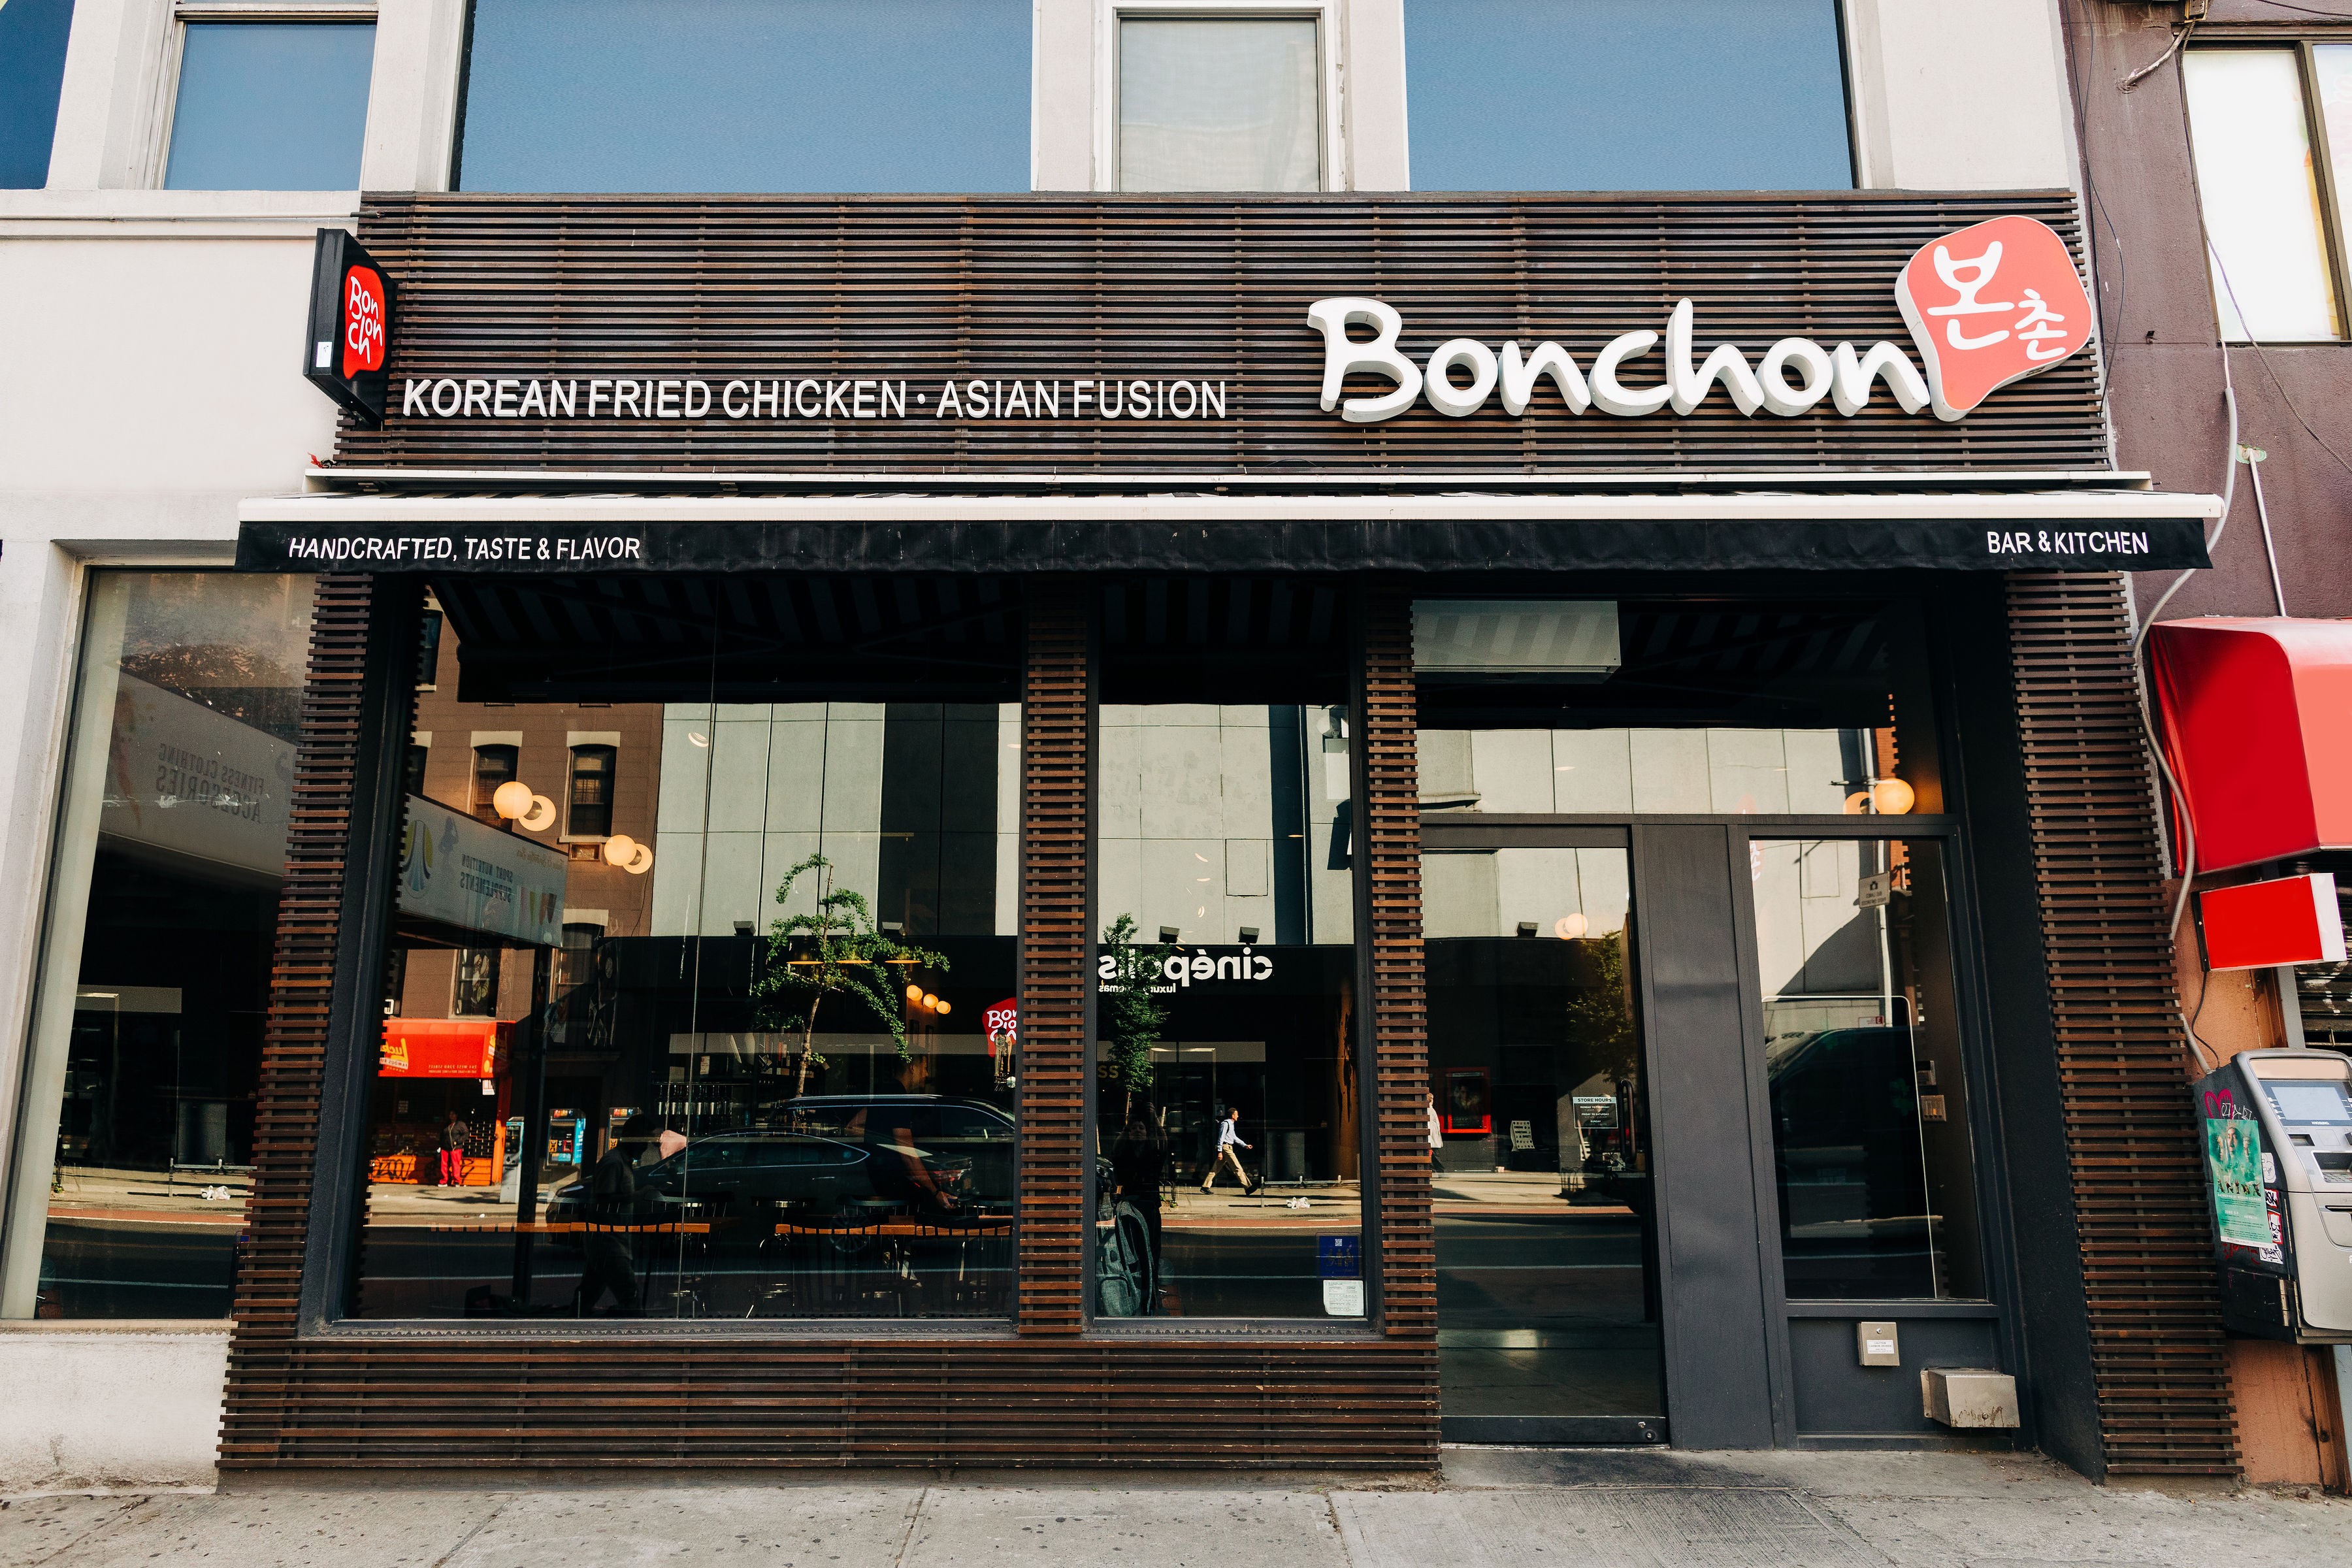 Bonchon menu prices featuring 62 items ranging from $0.95 to $37.95